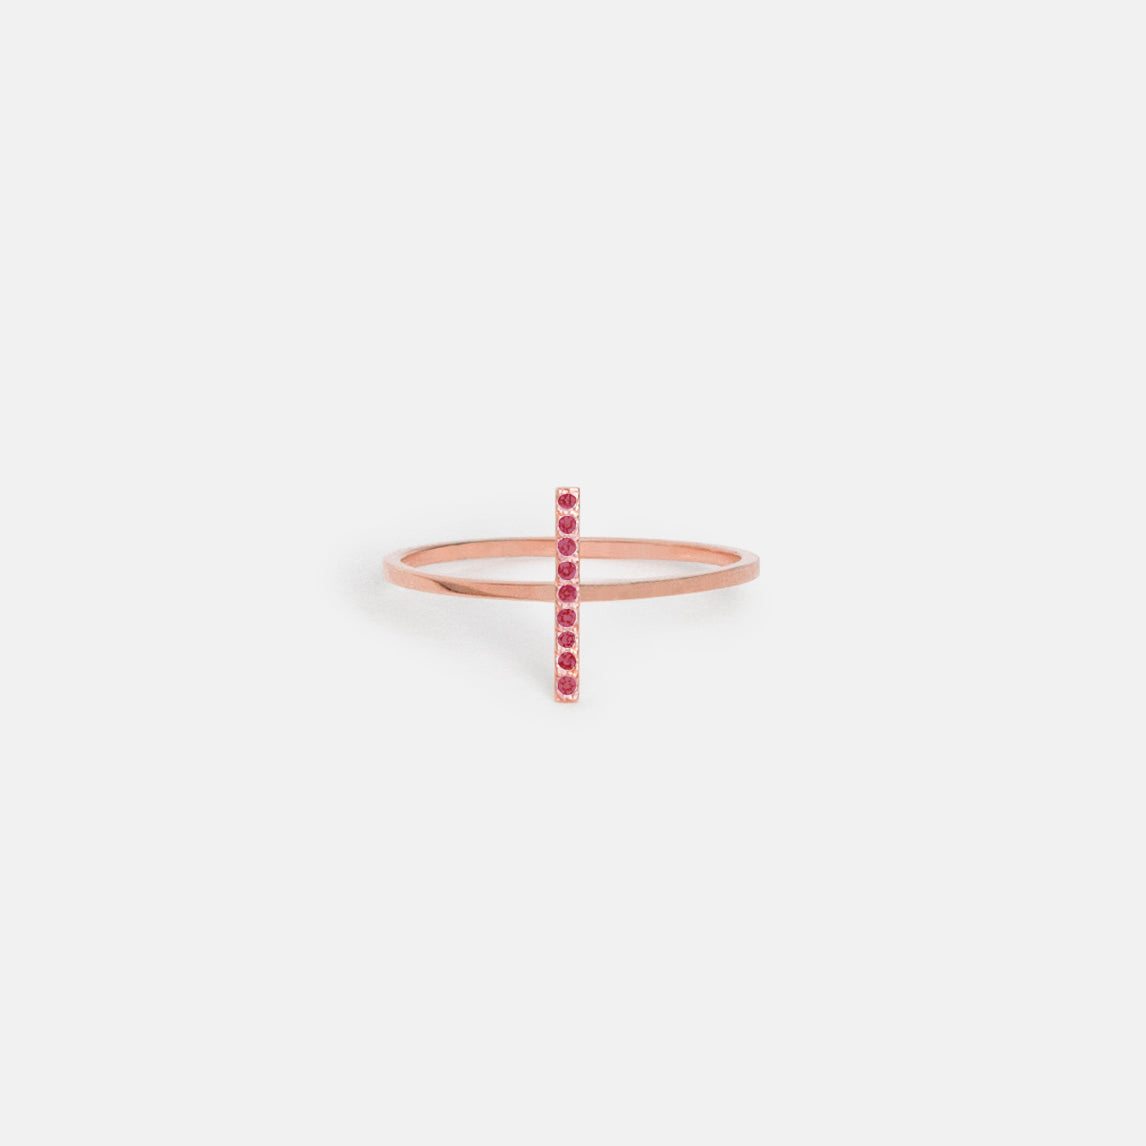 Steva Handmade Ring in 14k Rose Gold set with Rubies by SHW Fine Jewelry